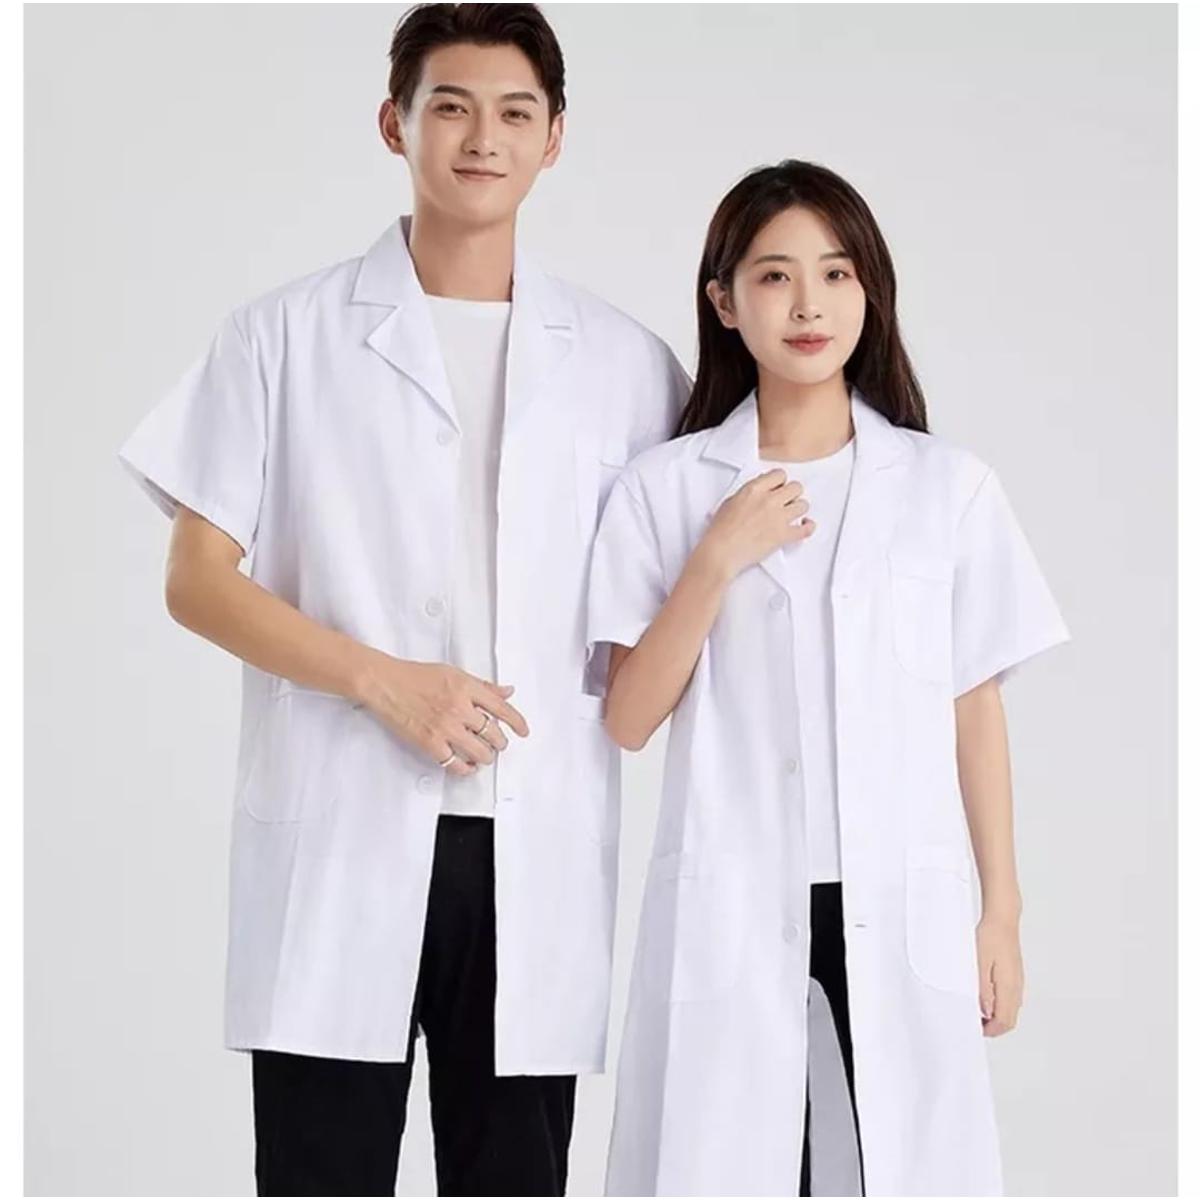 Professional Lab Coats Best Quality Fabrics Pure White Cotton for